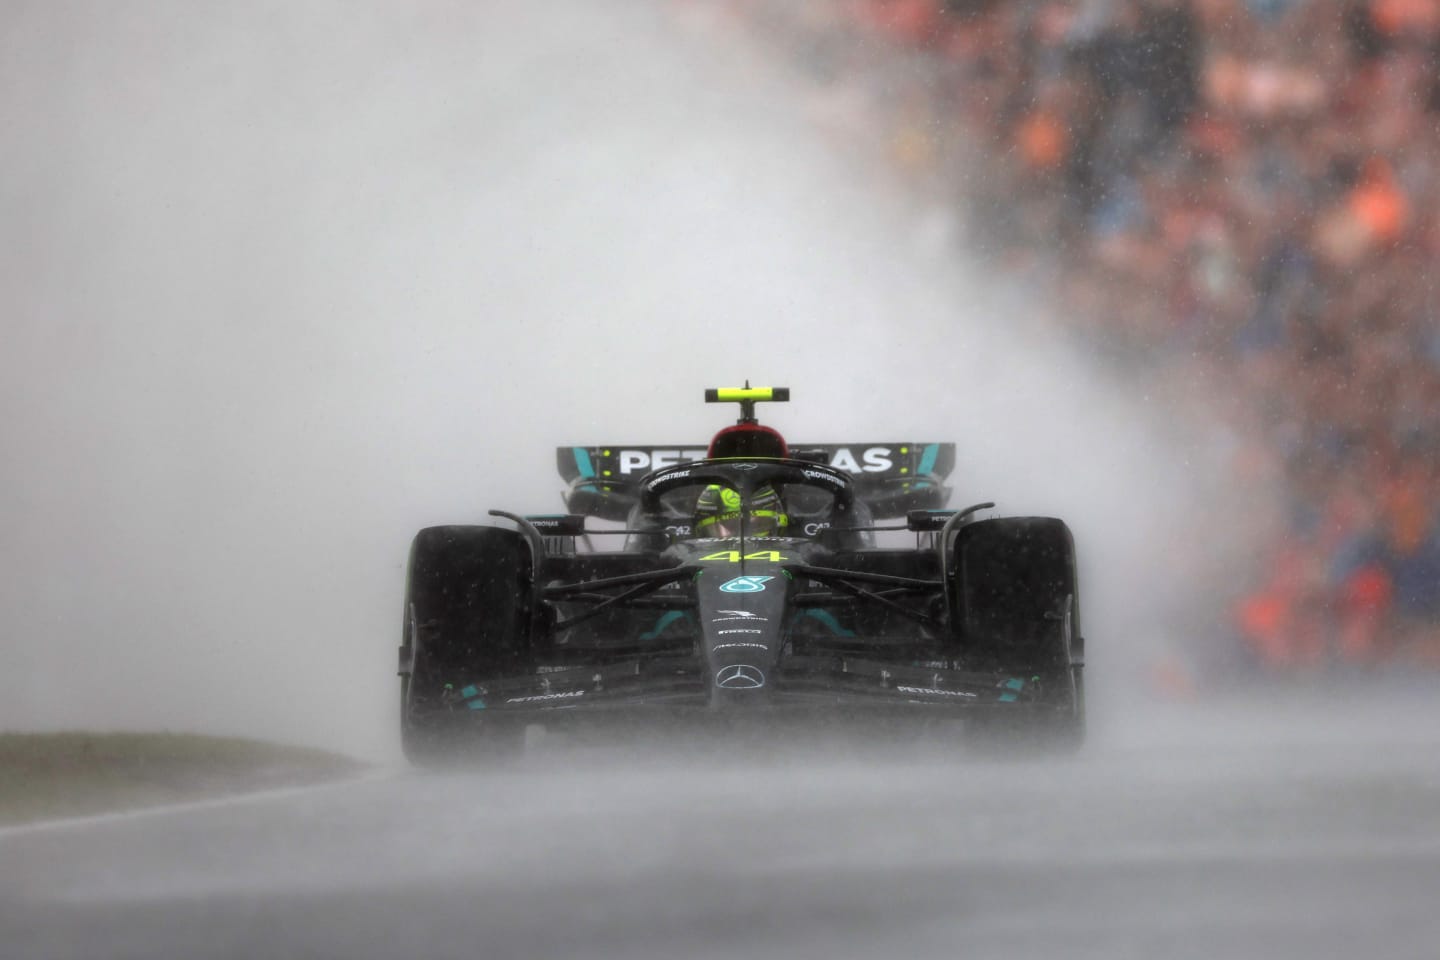 ZANDVOORT, NETHERLANDS - AUGUST 27: Lewis Hamilton of Great Britain driving the (44) Mercedes AMG Petronas F1 Team W14 in the rain during the F1 Grand Prix of The Netherlands at Circuit Zandvoort on August 27, 2023 in Zandvoort, Netherlands. (Photo by Lars Baron/Getty Images)